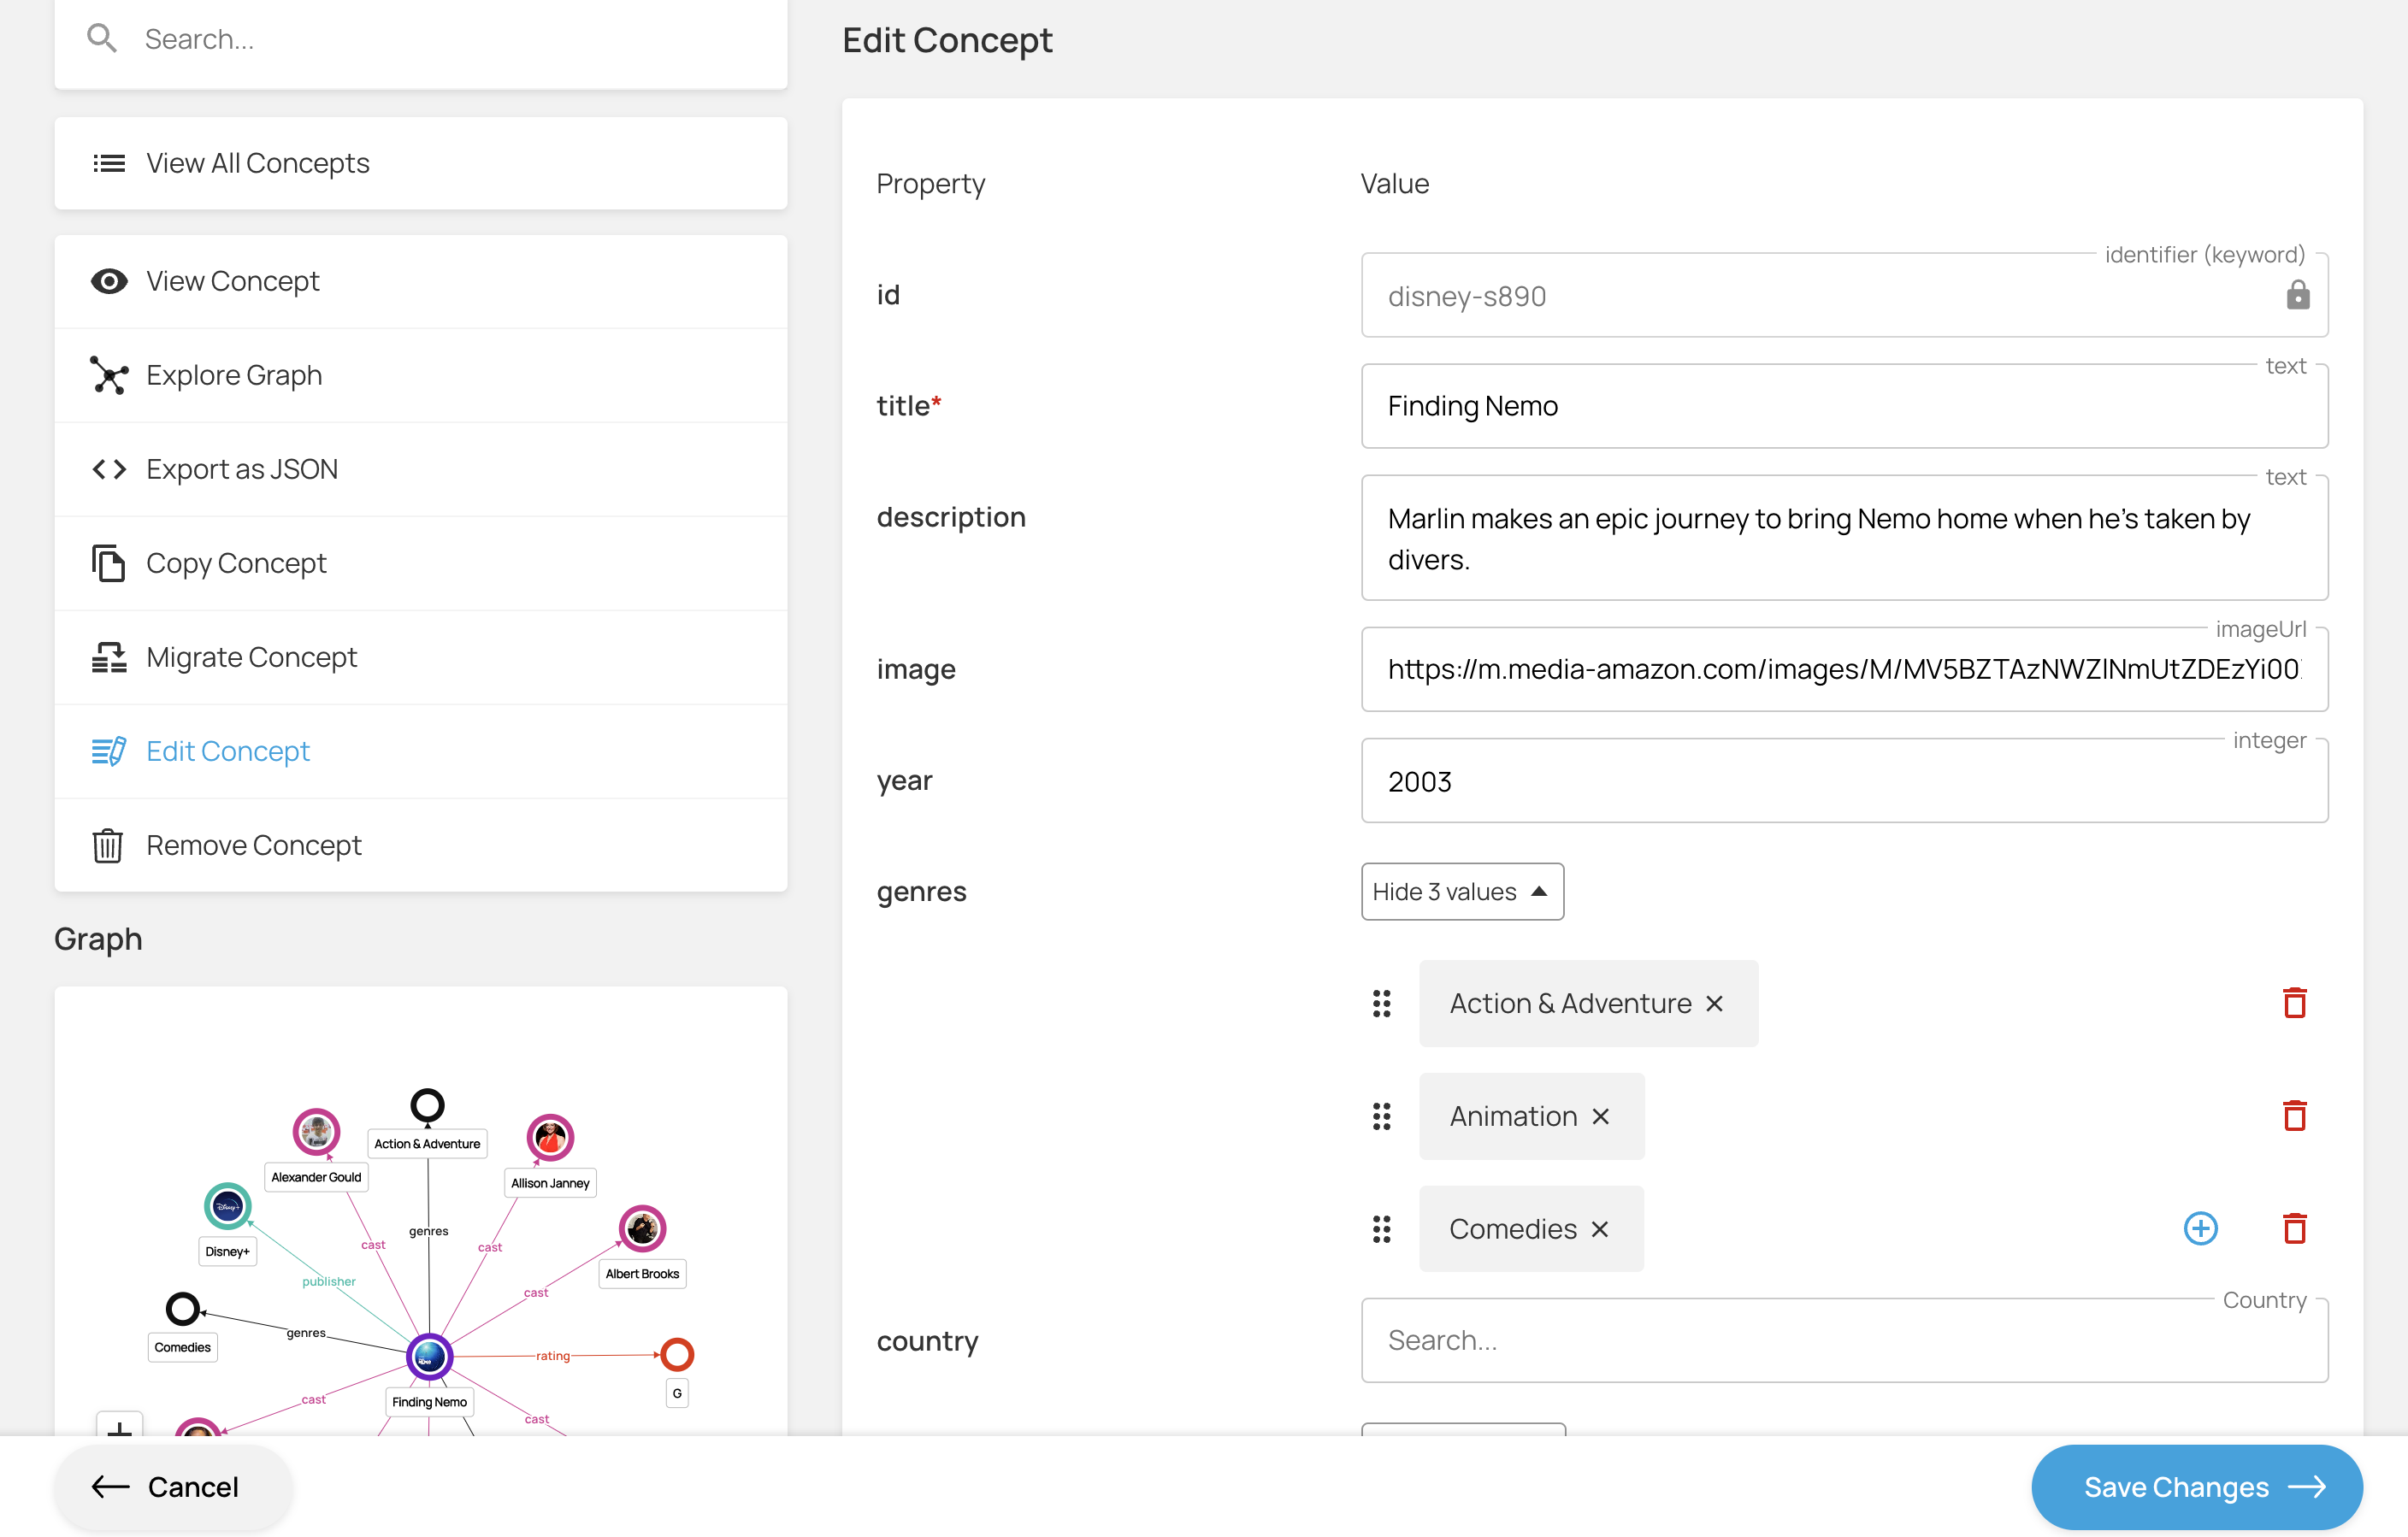 Upload or manually create data for your knowledge graph